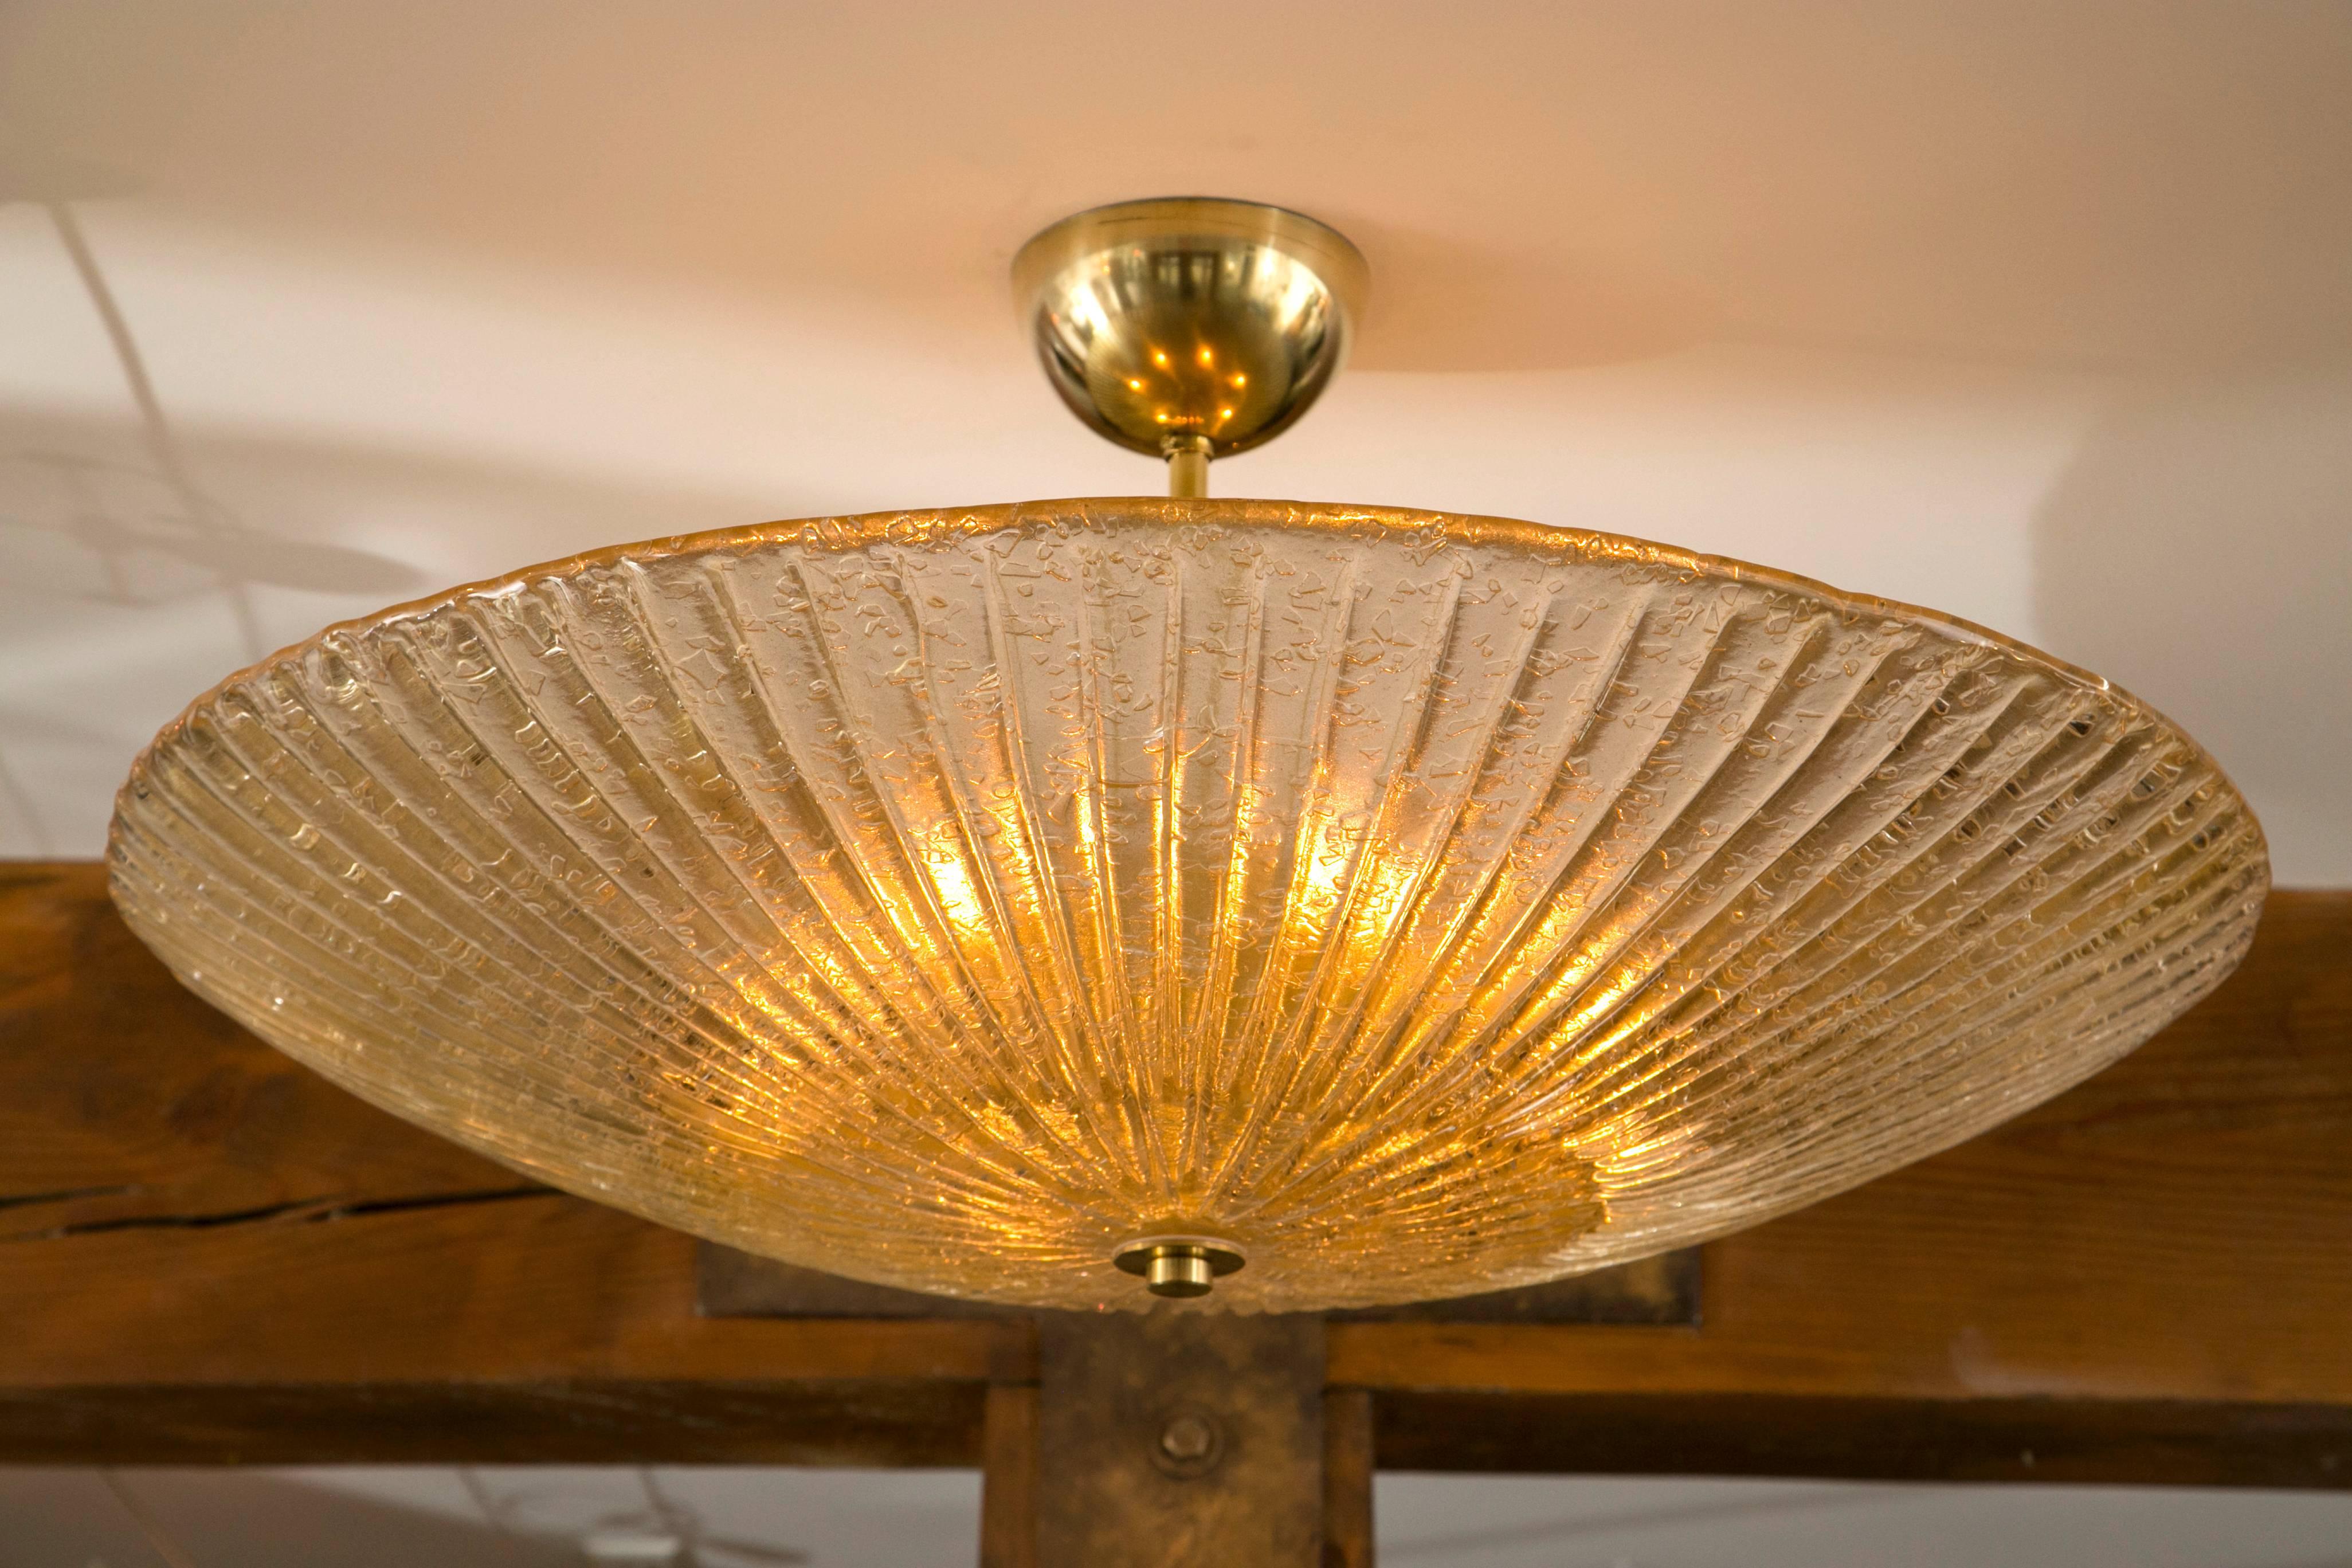 Circular-shaped and reeded Murano blown ceiling fixtures blown in a champagne color with brass fittings.
Multiples available, priced individually.
Glass measure 32in diameter, 8in high.
Installed height can be modified to a near flush